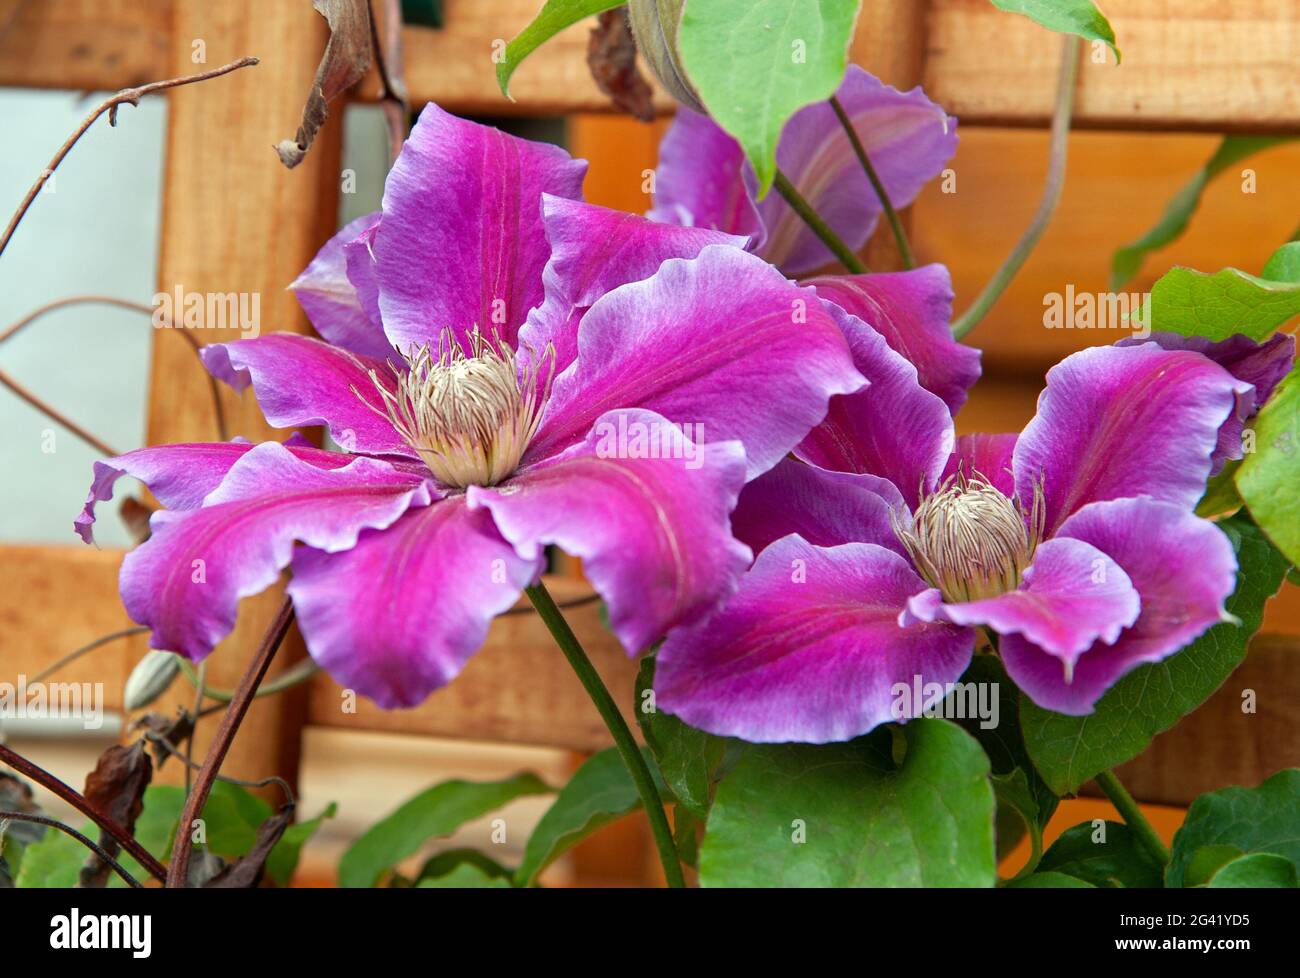 Leather flower , Clematis hybrid close up blossom in the garden Stock Photo